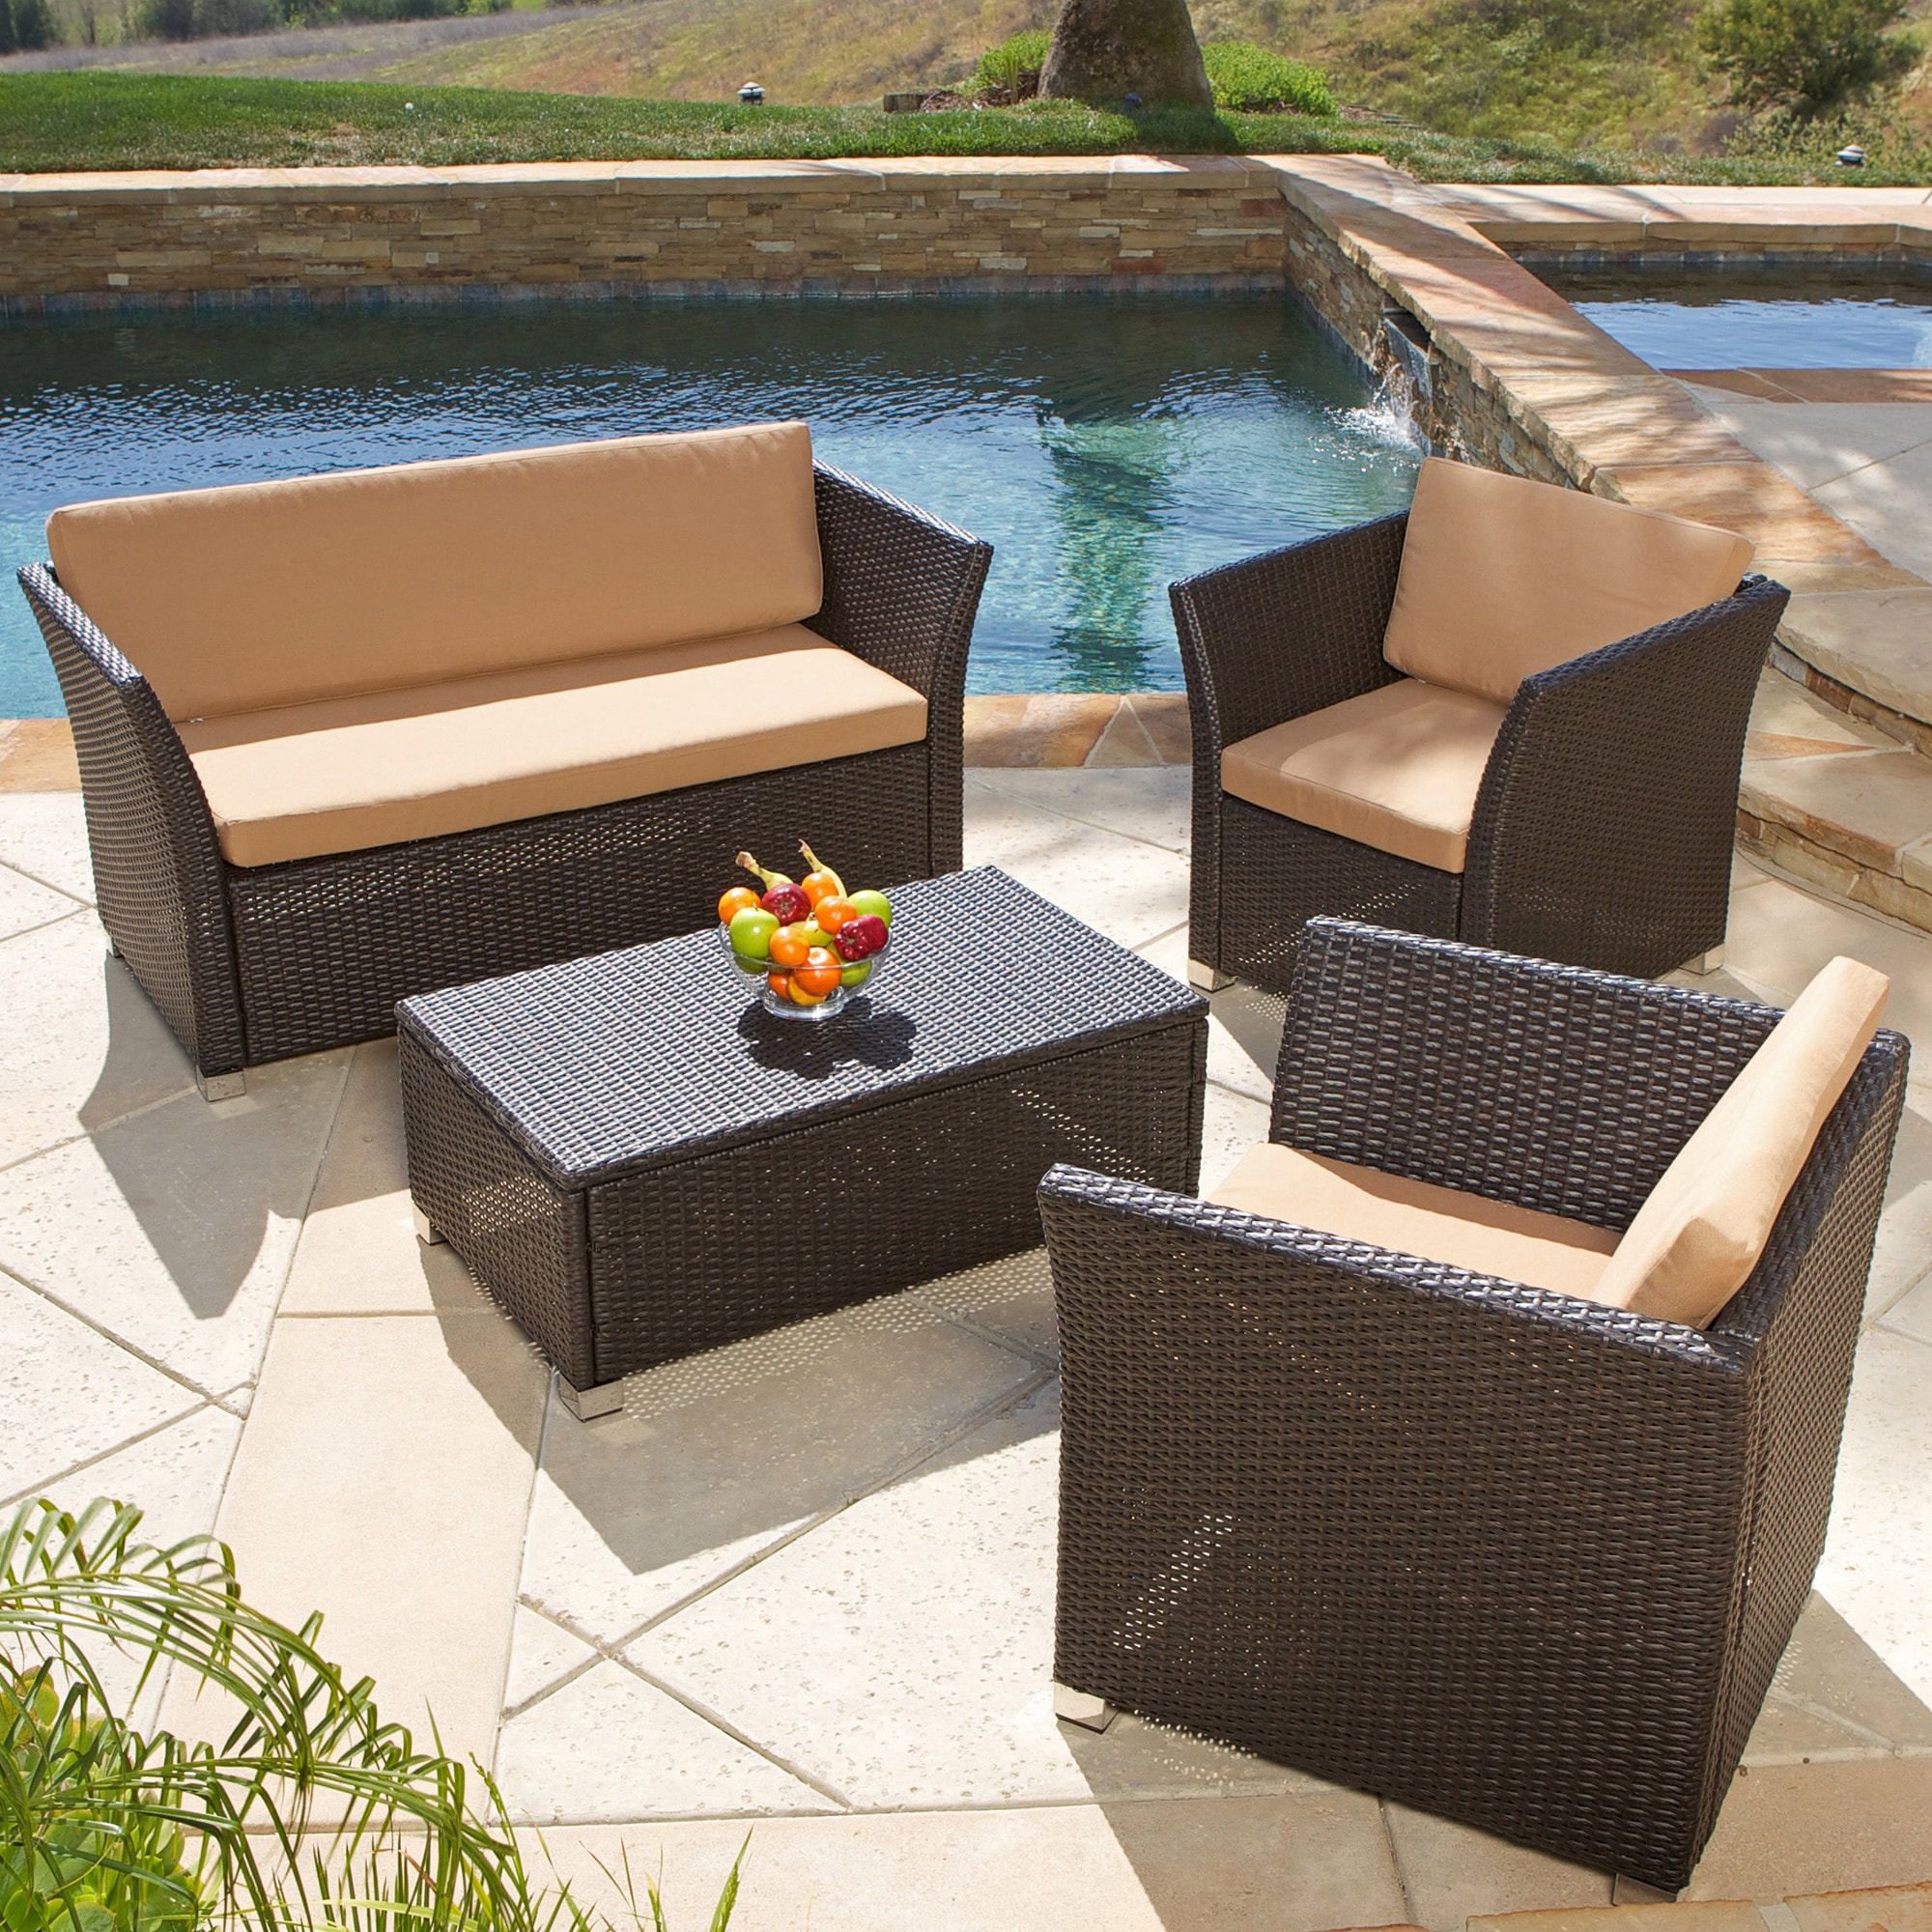 Christopher Knight Home Brown 4 piece All weather Wicker Patio Furniture Sofa Set